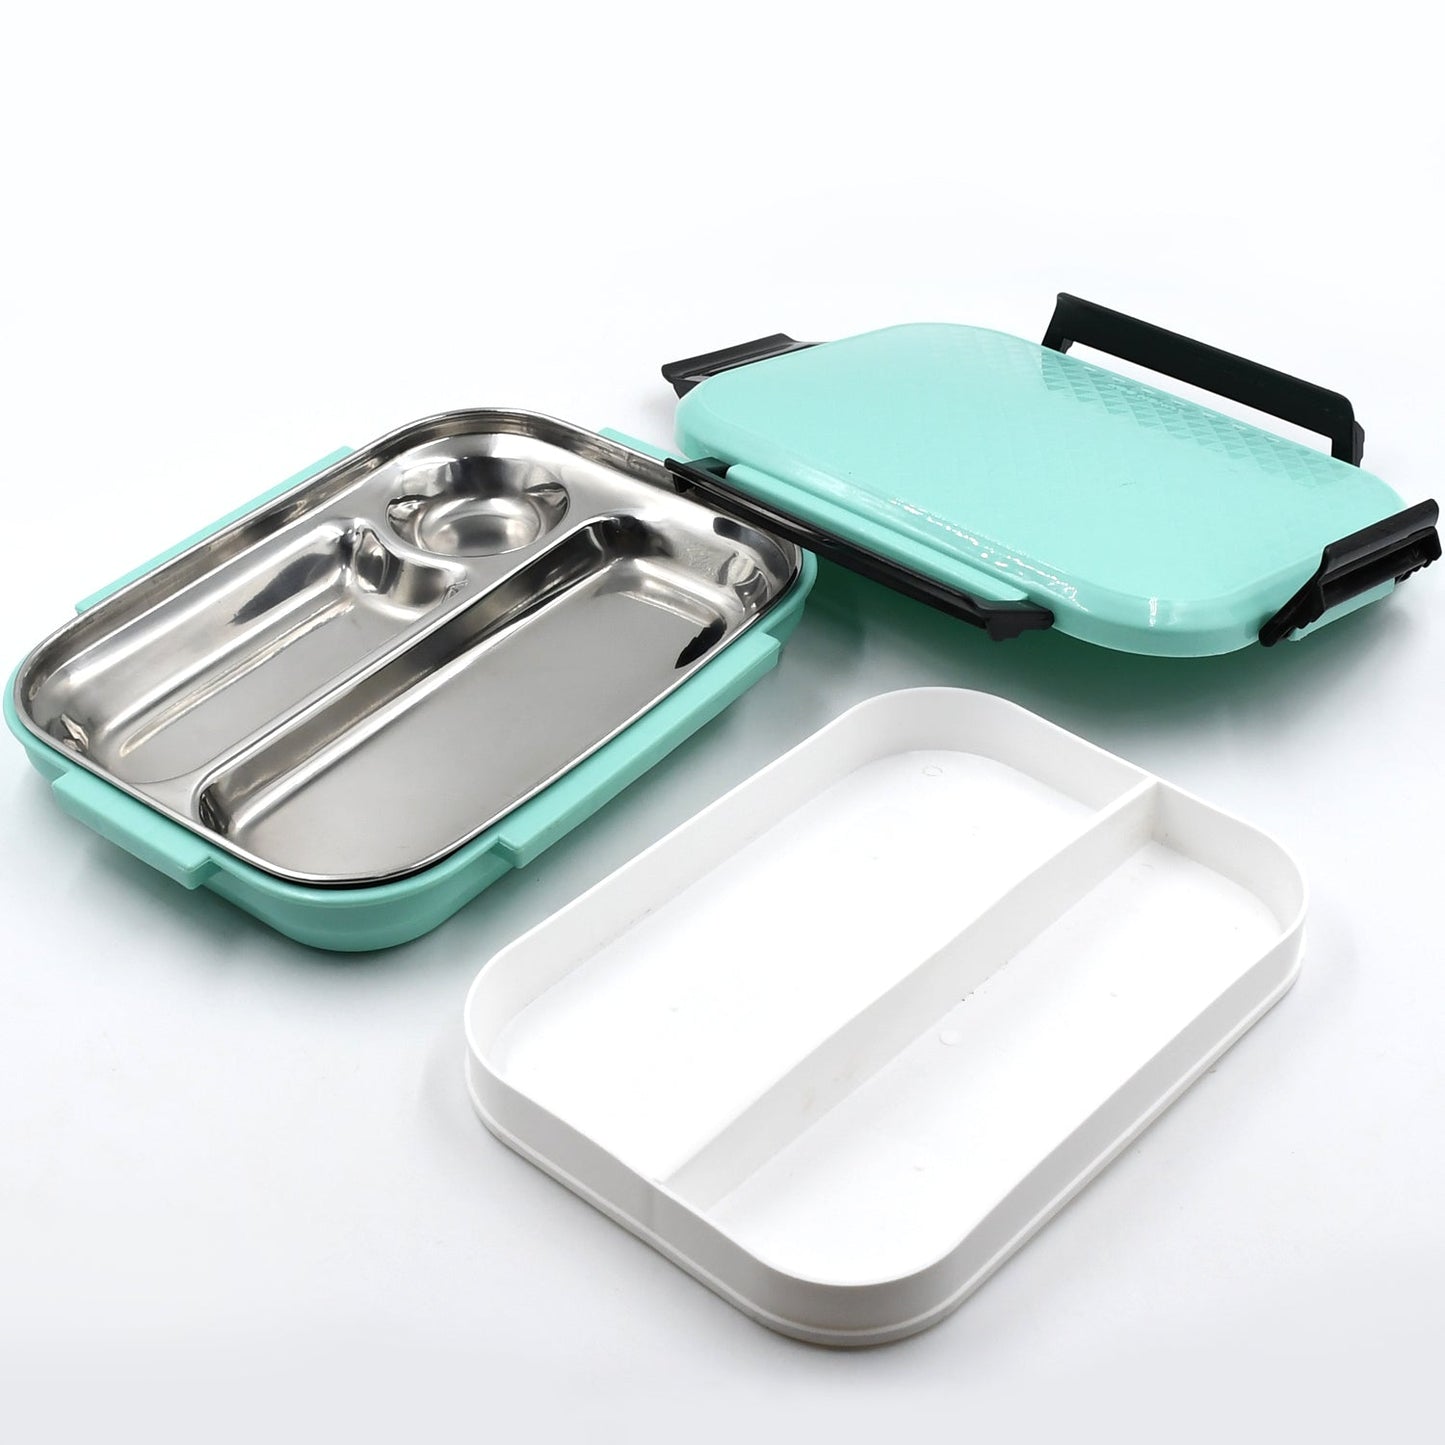 Break Time Lunch Box Steel Plate Multi Compartment Lunch Box Carry To All Type lunch In Lunch Box & Premium Quality Lunch Box ideal For Office, School Kids & Travelling Ideal